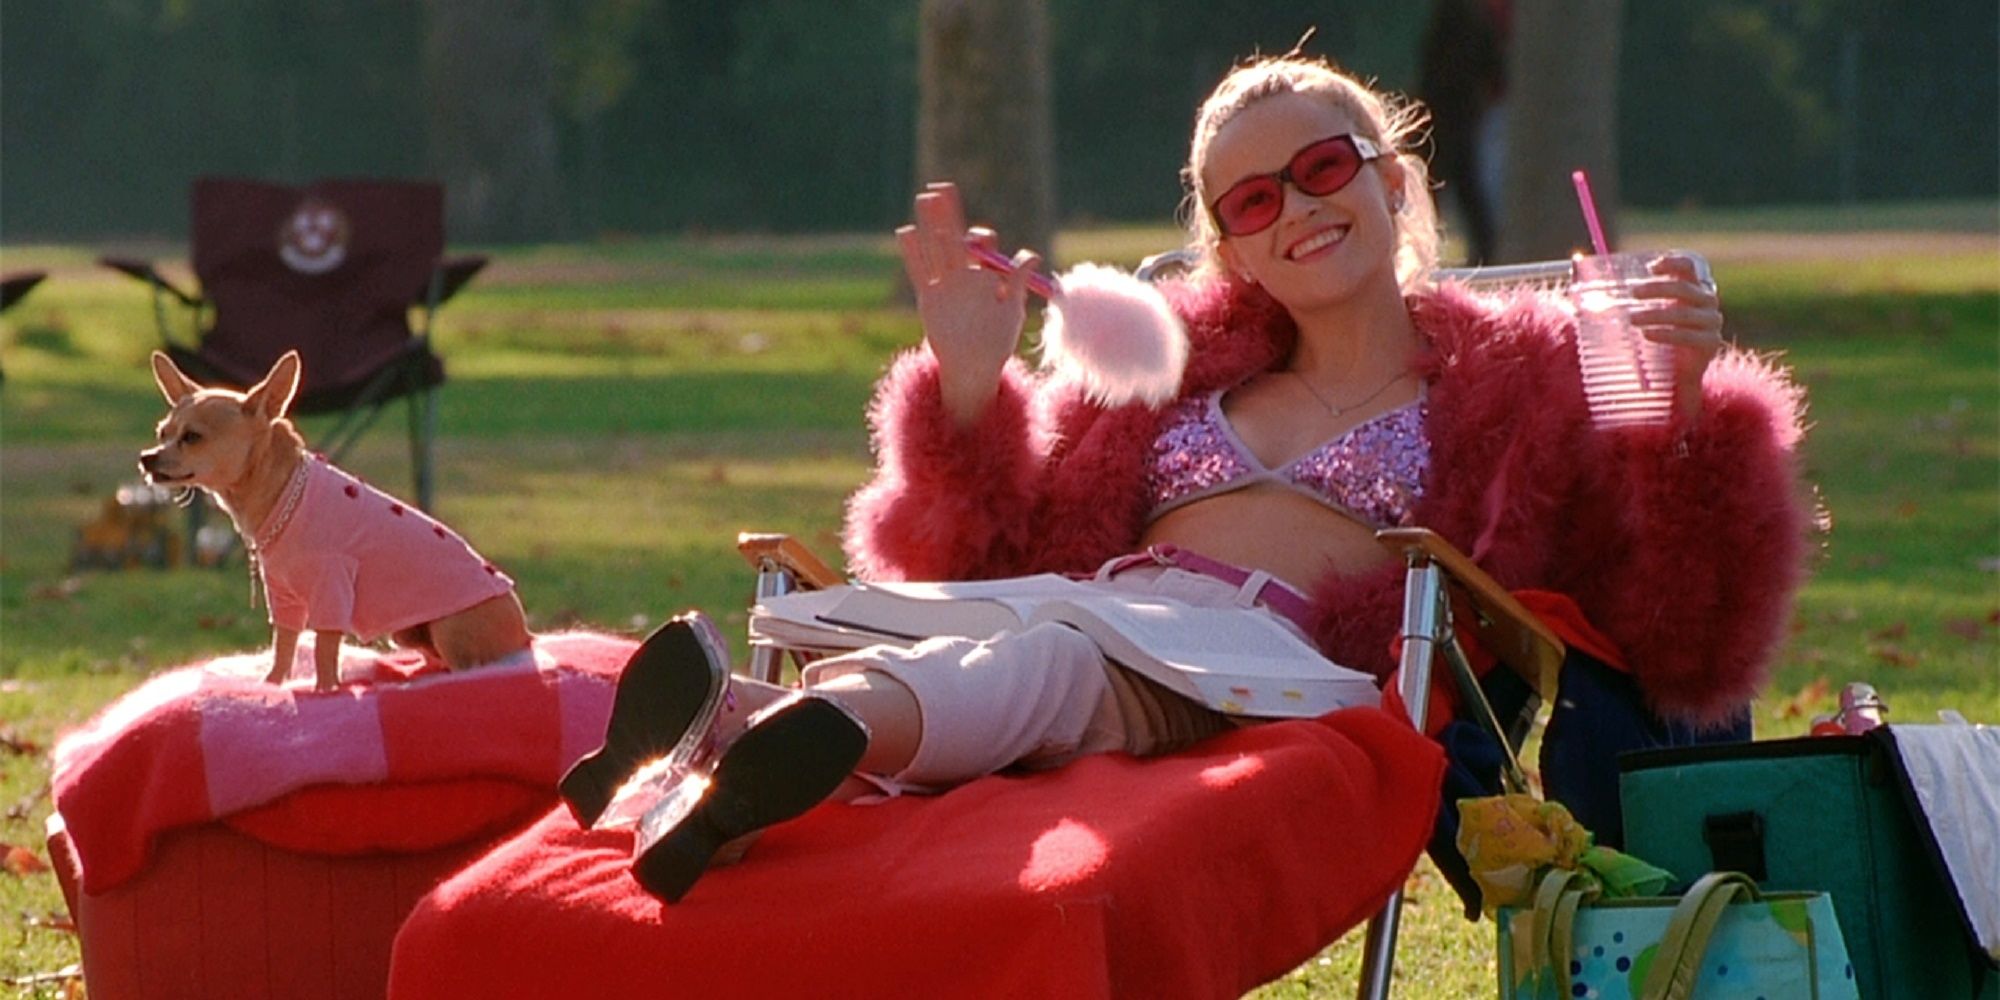 Legally Blonde with Reese Witherspoon lounging on chair.